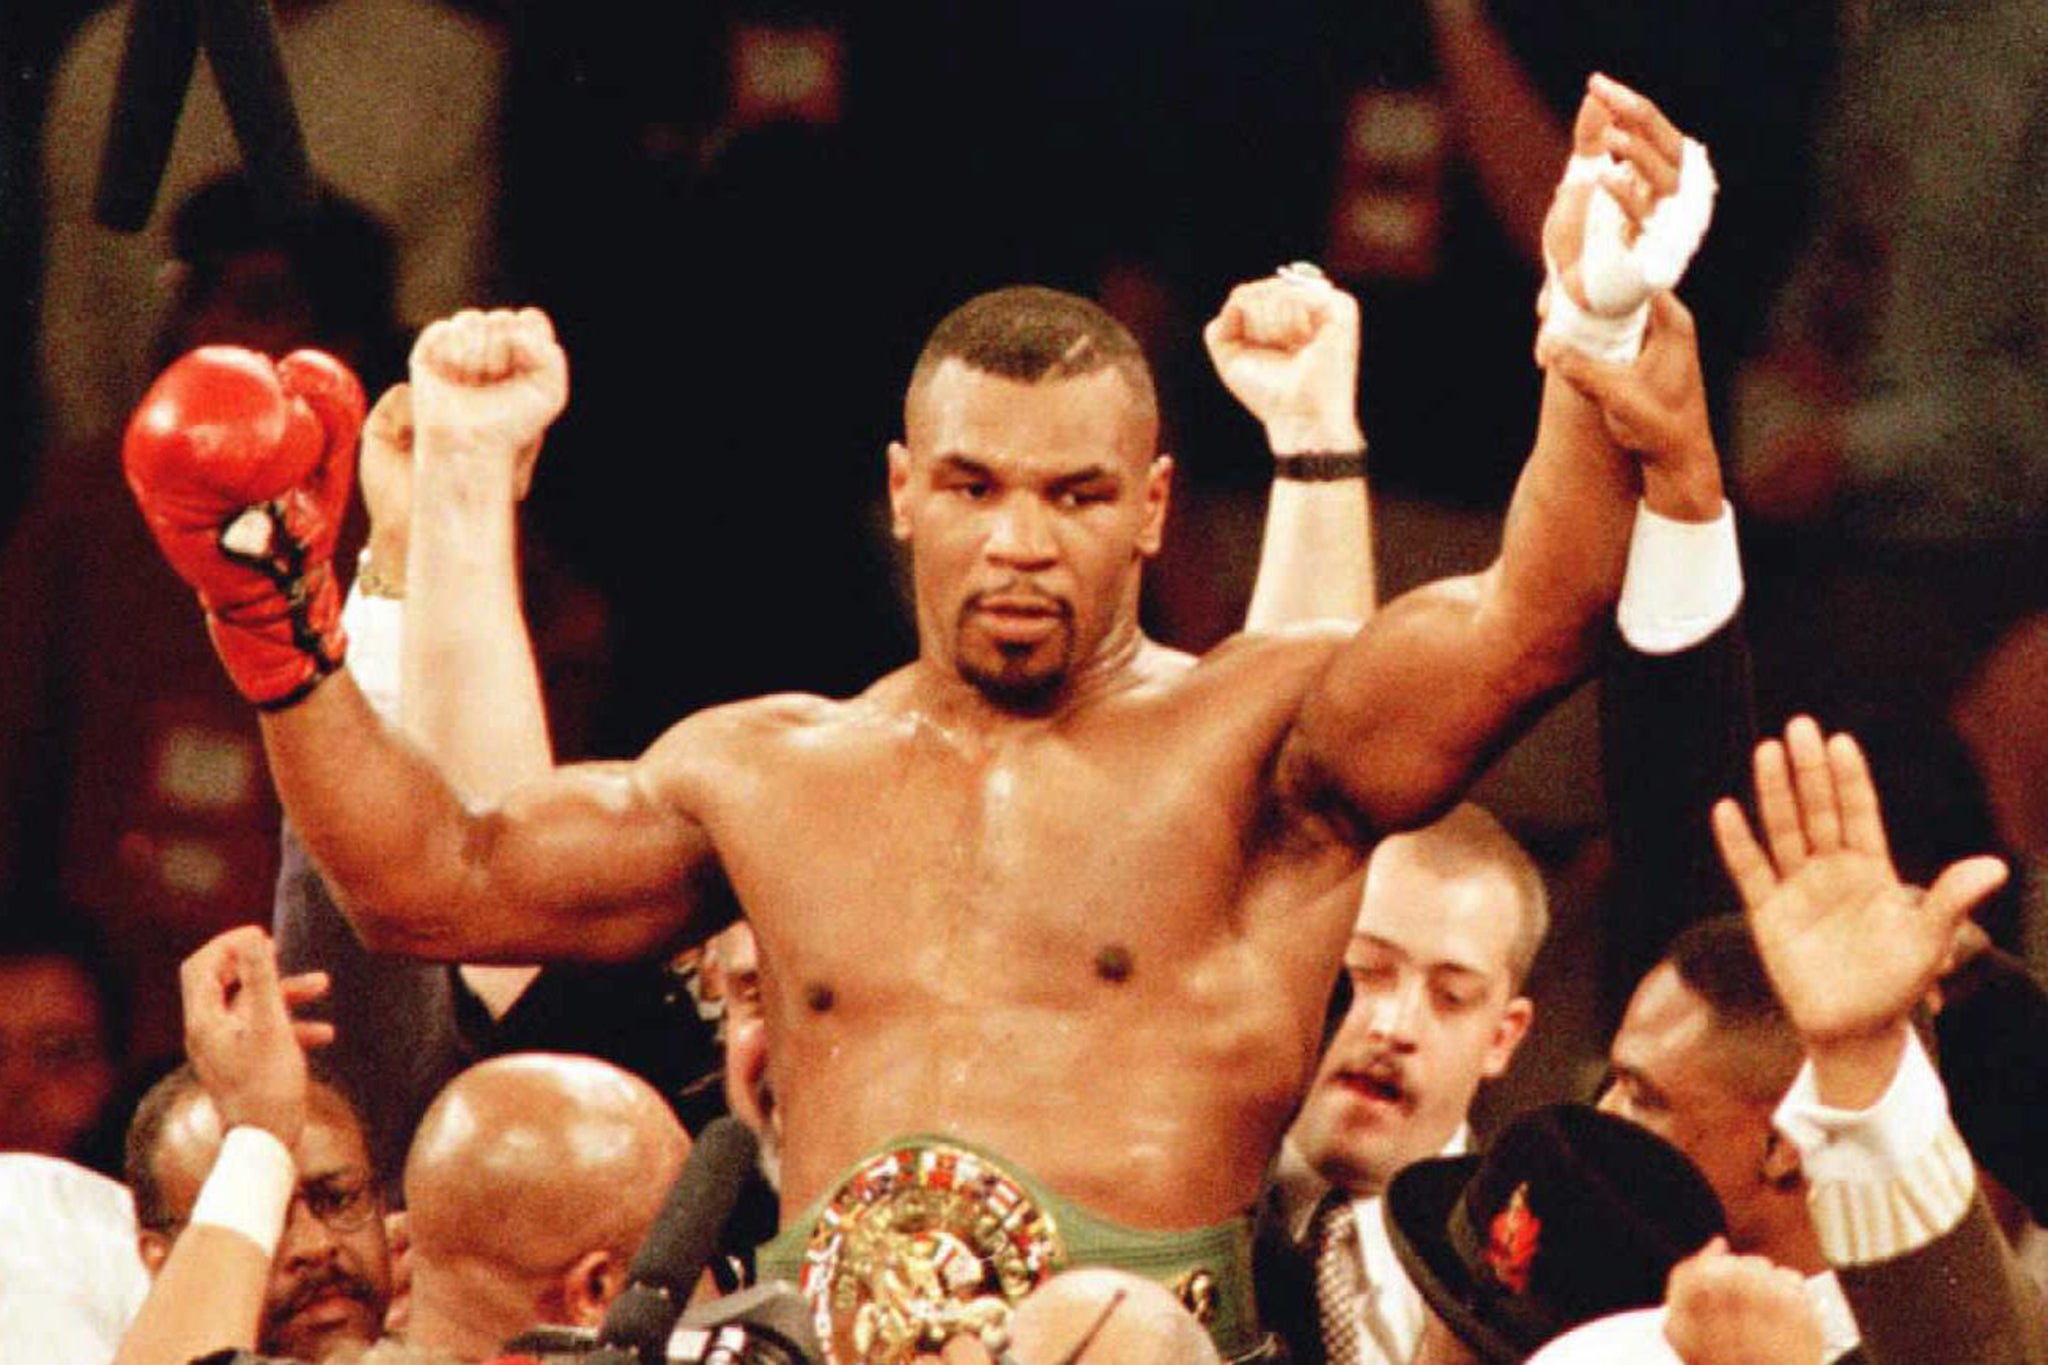 Tyson would go on to beat Bruno again in 1996